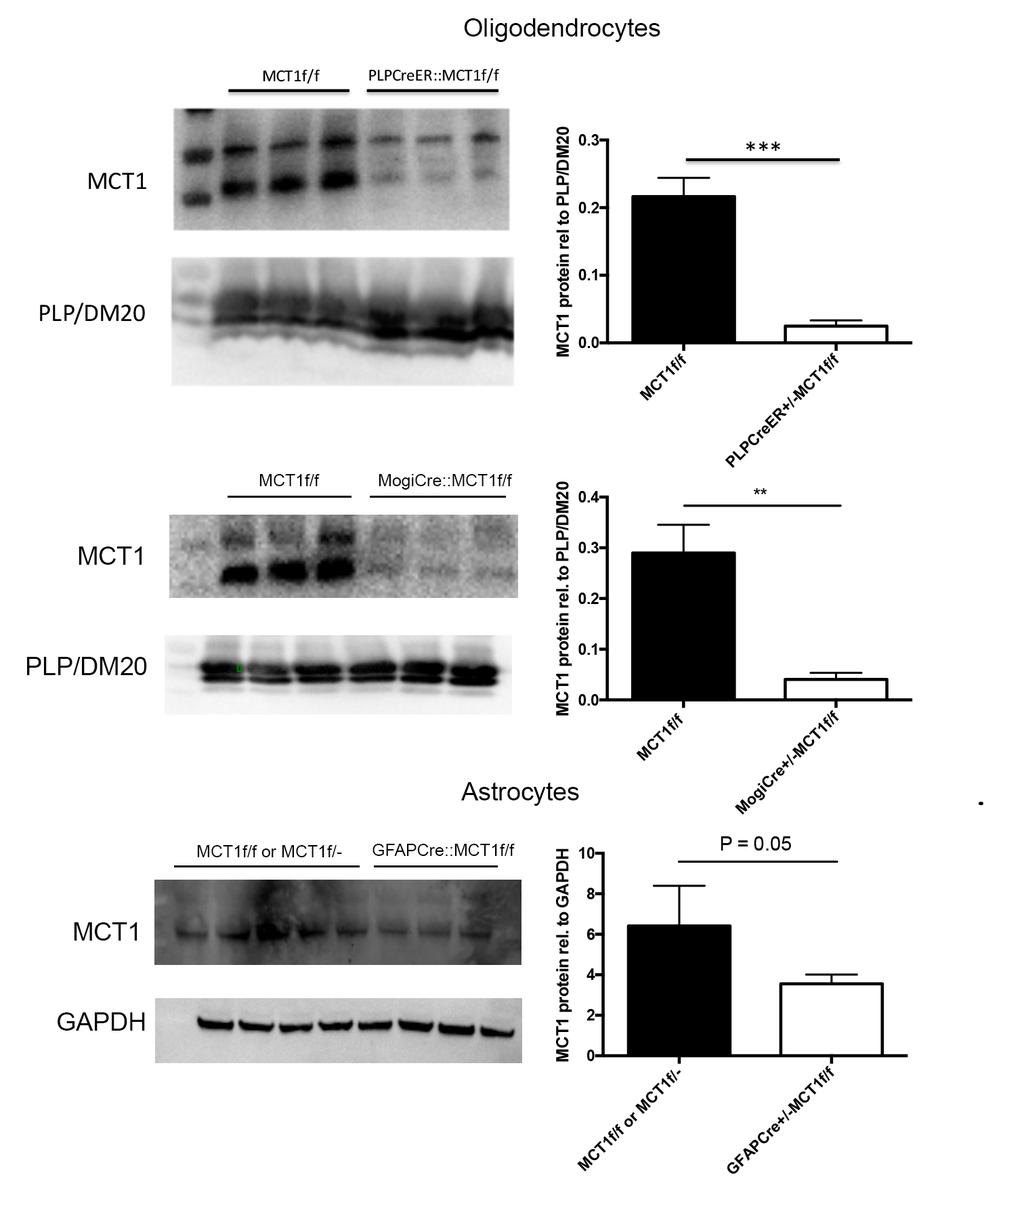 Fig 5. Loss of MCT1 protein when MCT1 conditional knockout mice are crossed with oligodendrocyte or astrocyte specific Cre lines.